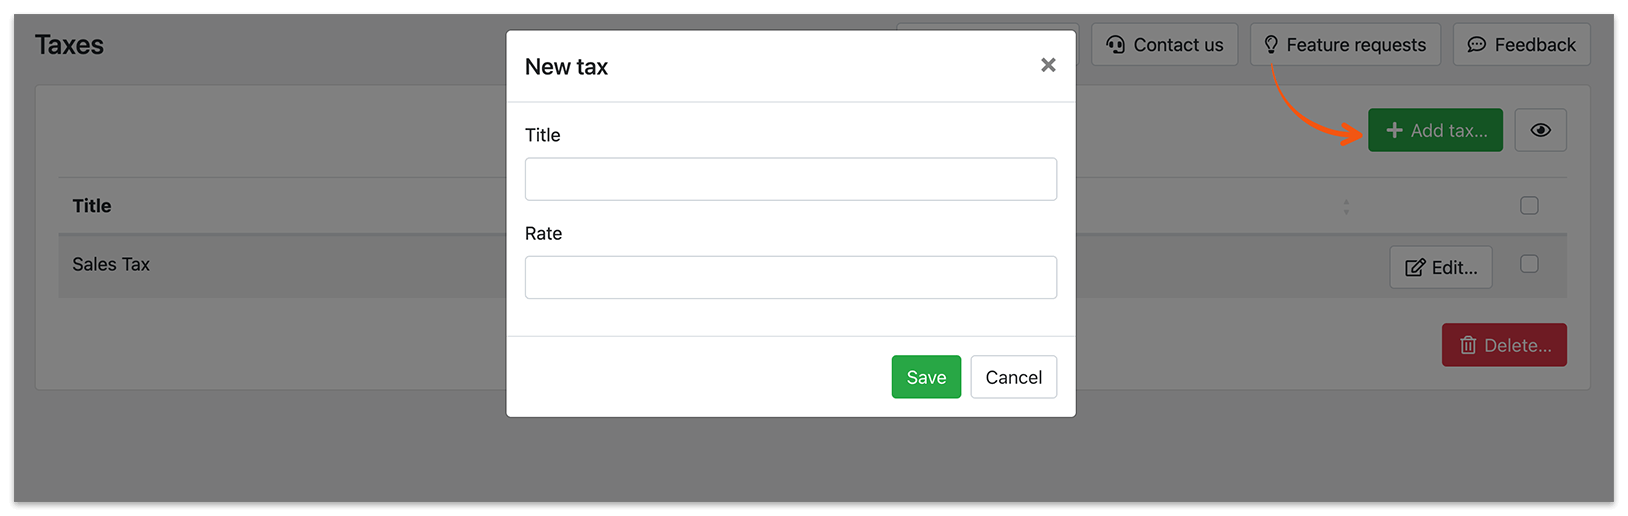 Taxes section in Bookly